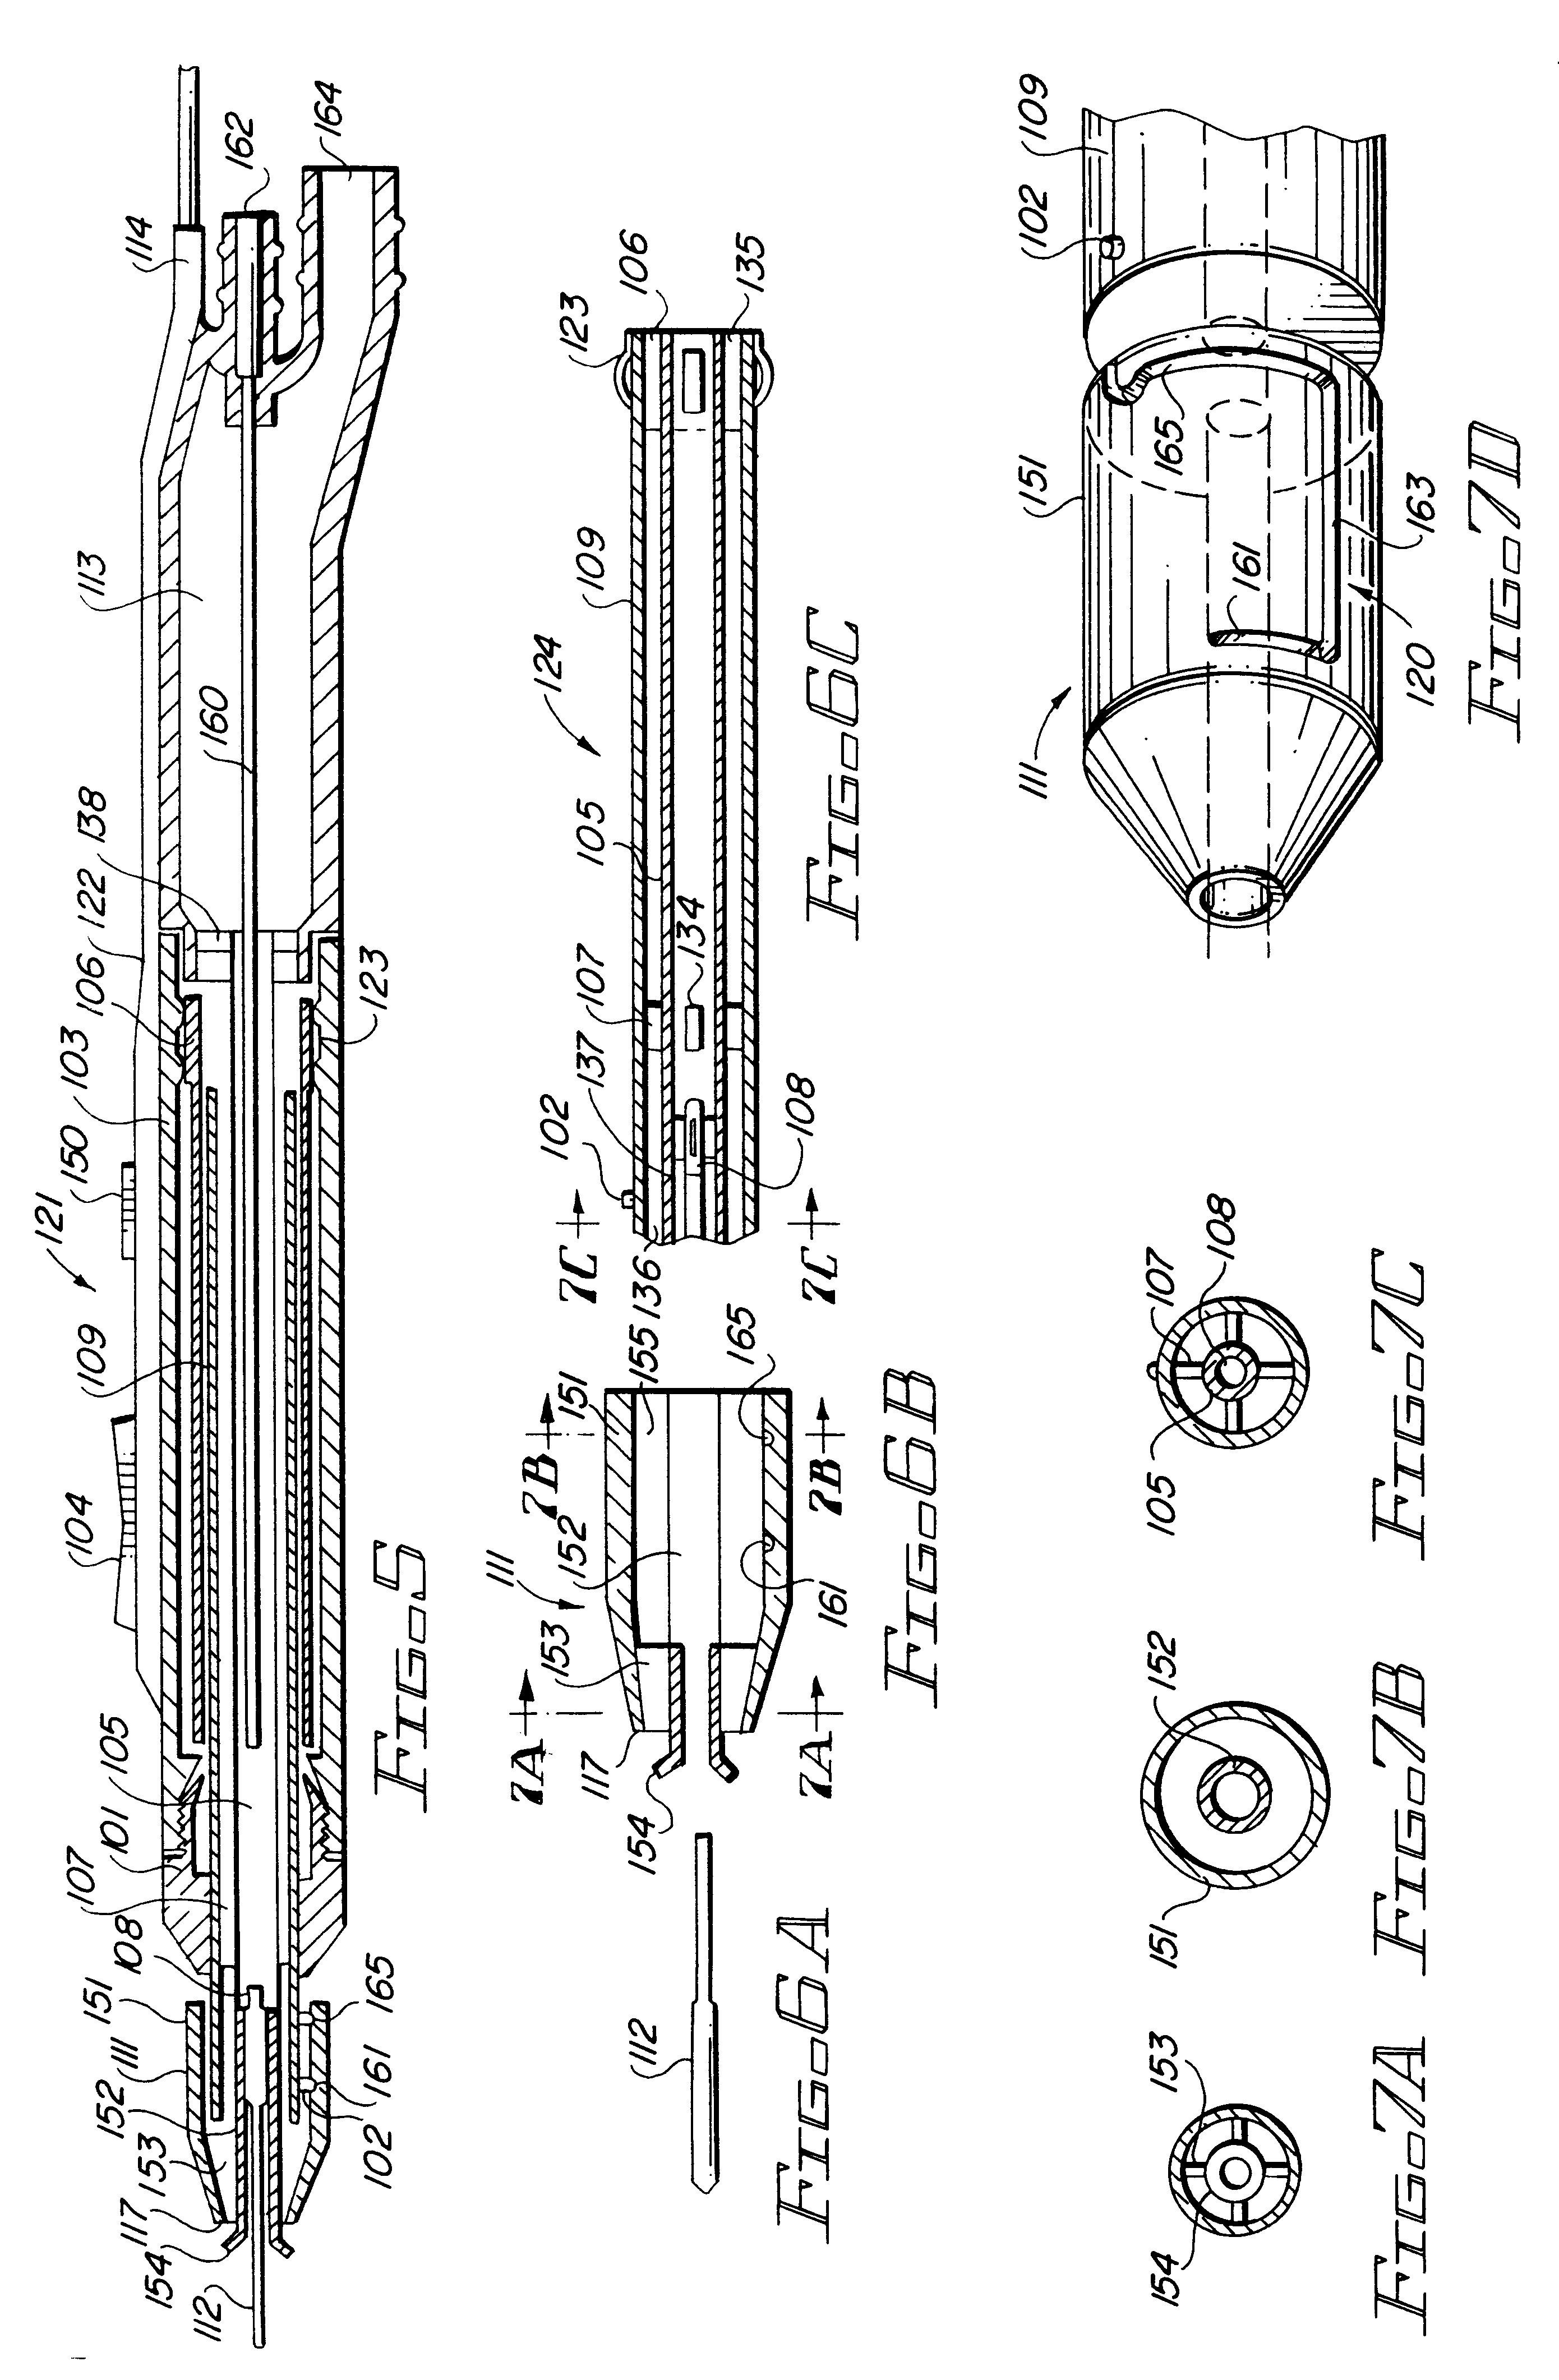 Electro-surgical unit pencil apparatus and method therefor